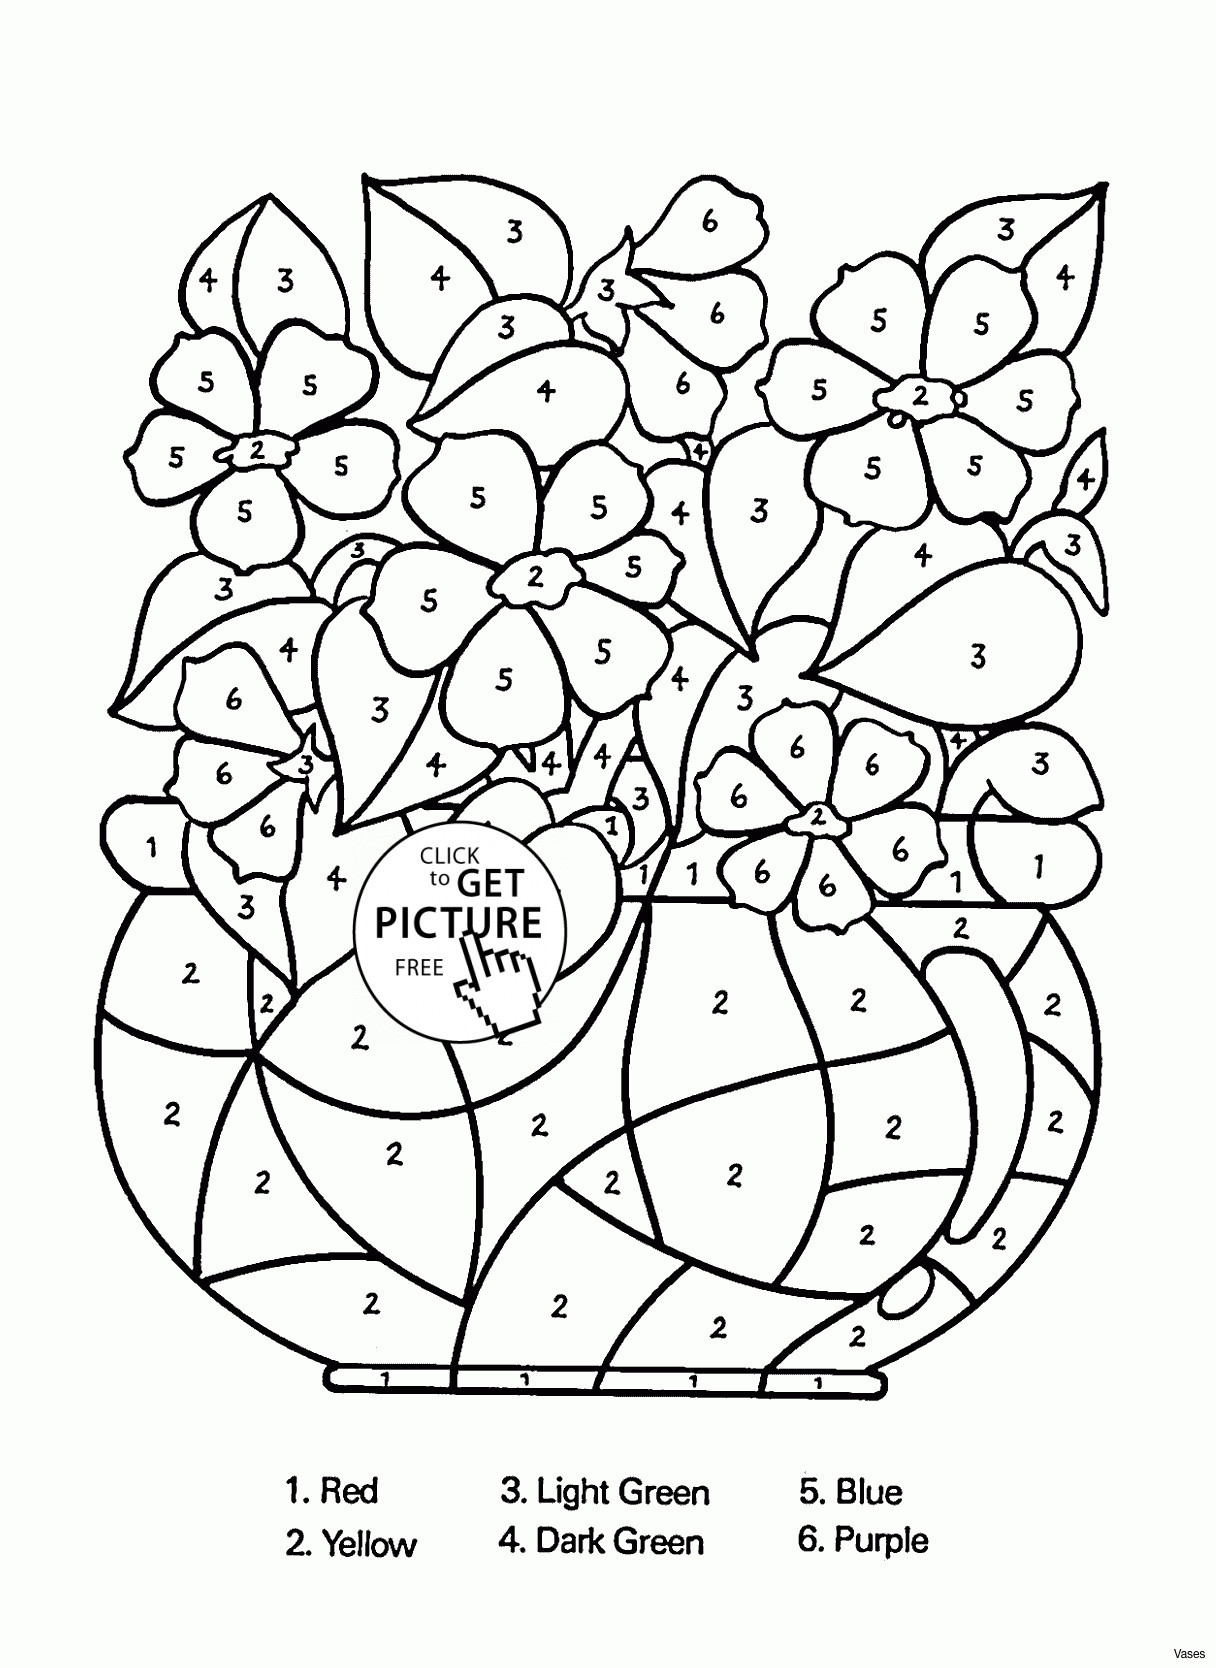 13 attractive White Floor Vase with Flowers 2022 free download white floor vase with flowers of dark green pillows new cool vases flower vase coloring page pages for dark green pillows new cool vases flower vase coloring page pages flowers in a top i